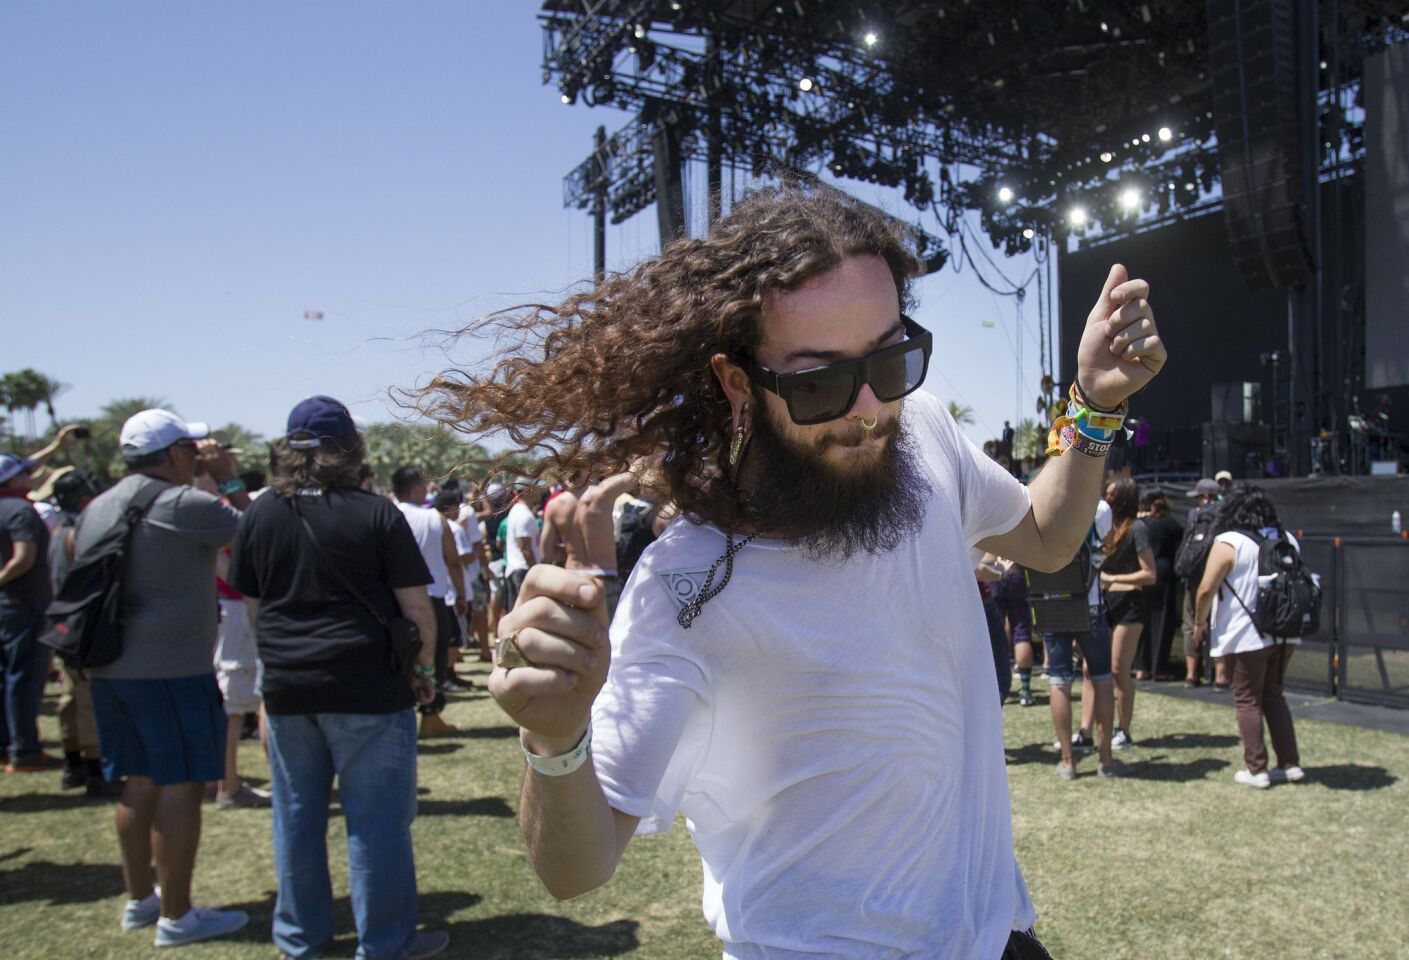 Day two of the 2015 Coachella Valley Music and Arts Festival . Brian Duenes of Los Angeles gets his groove on to the beat of the Tijuana, Mexico Band, The Nortec Collective.